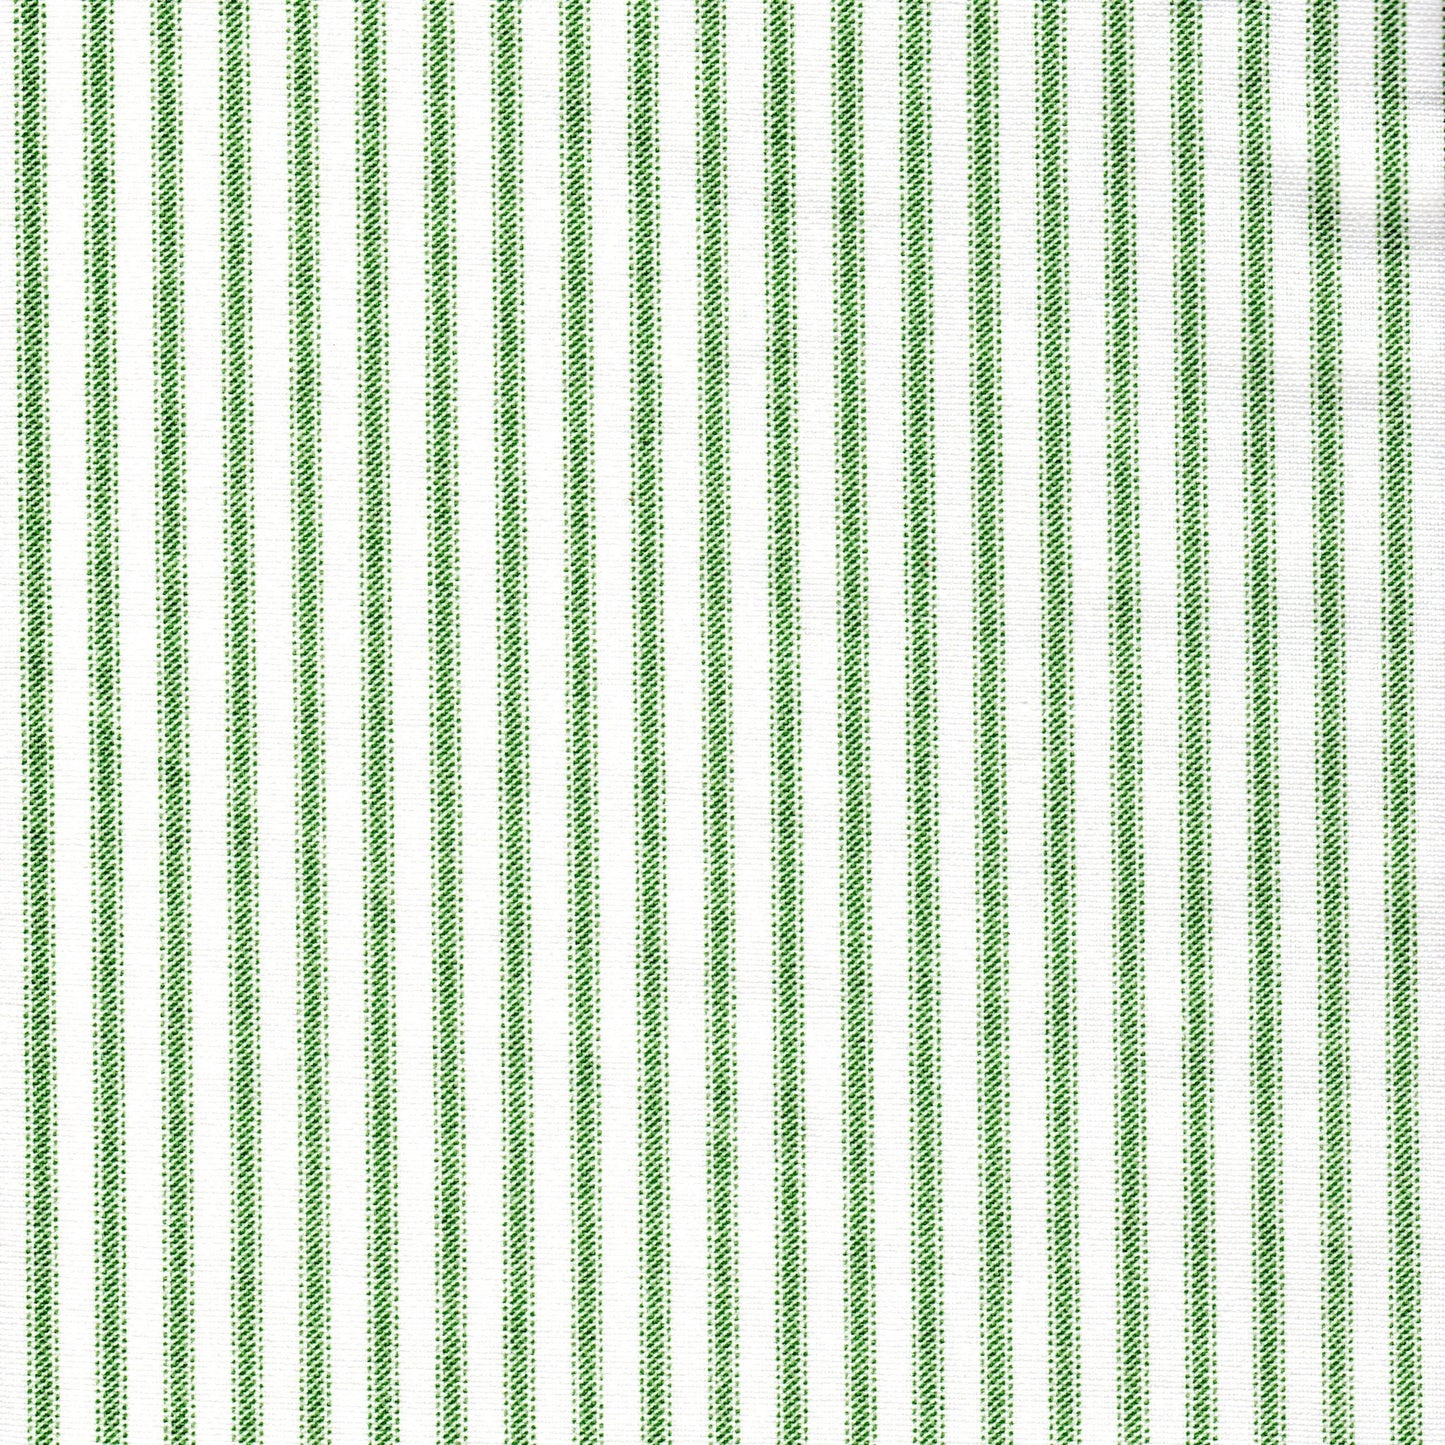 Gathered Bedskirt in Classic Pine Green Ticking Stripe on White